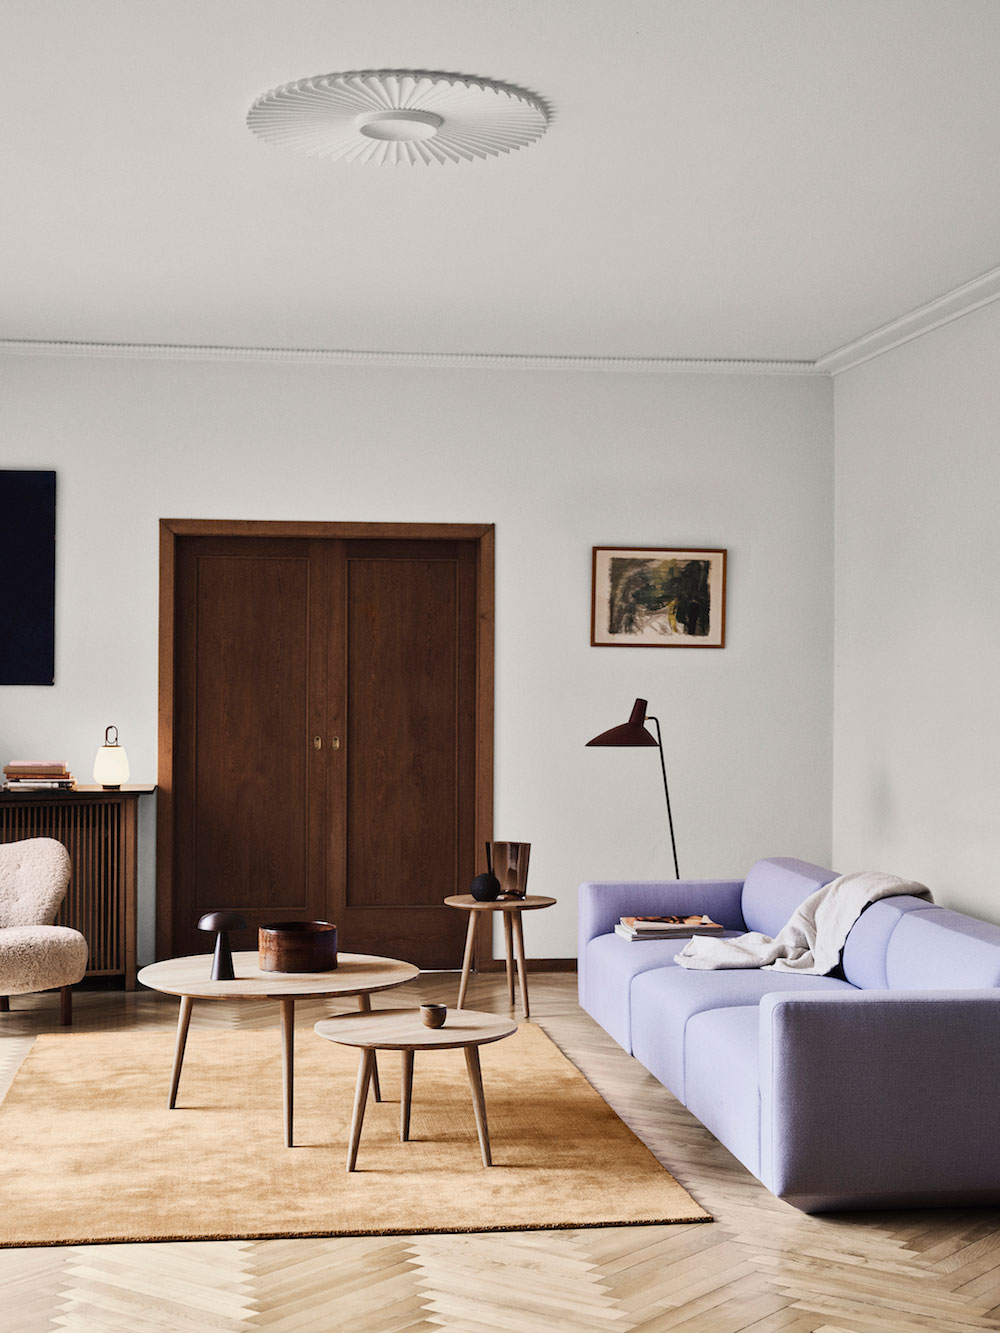 Contemporary Home Styling With A Cool Retro Vibe For Modernism Fans -  Nordic Design